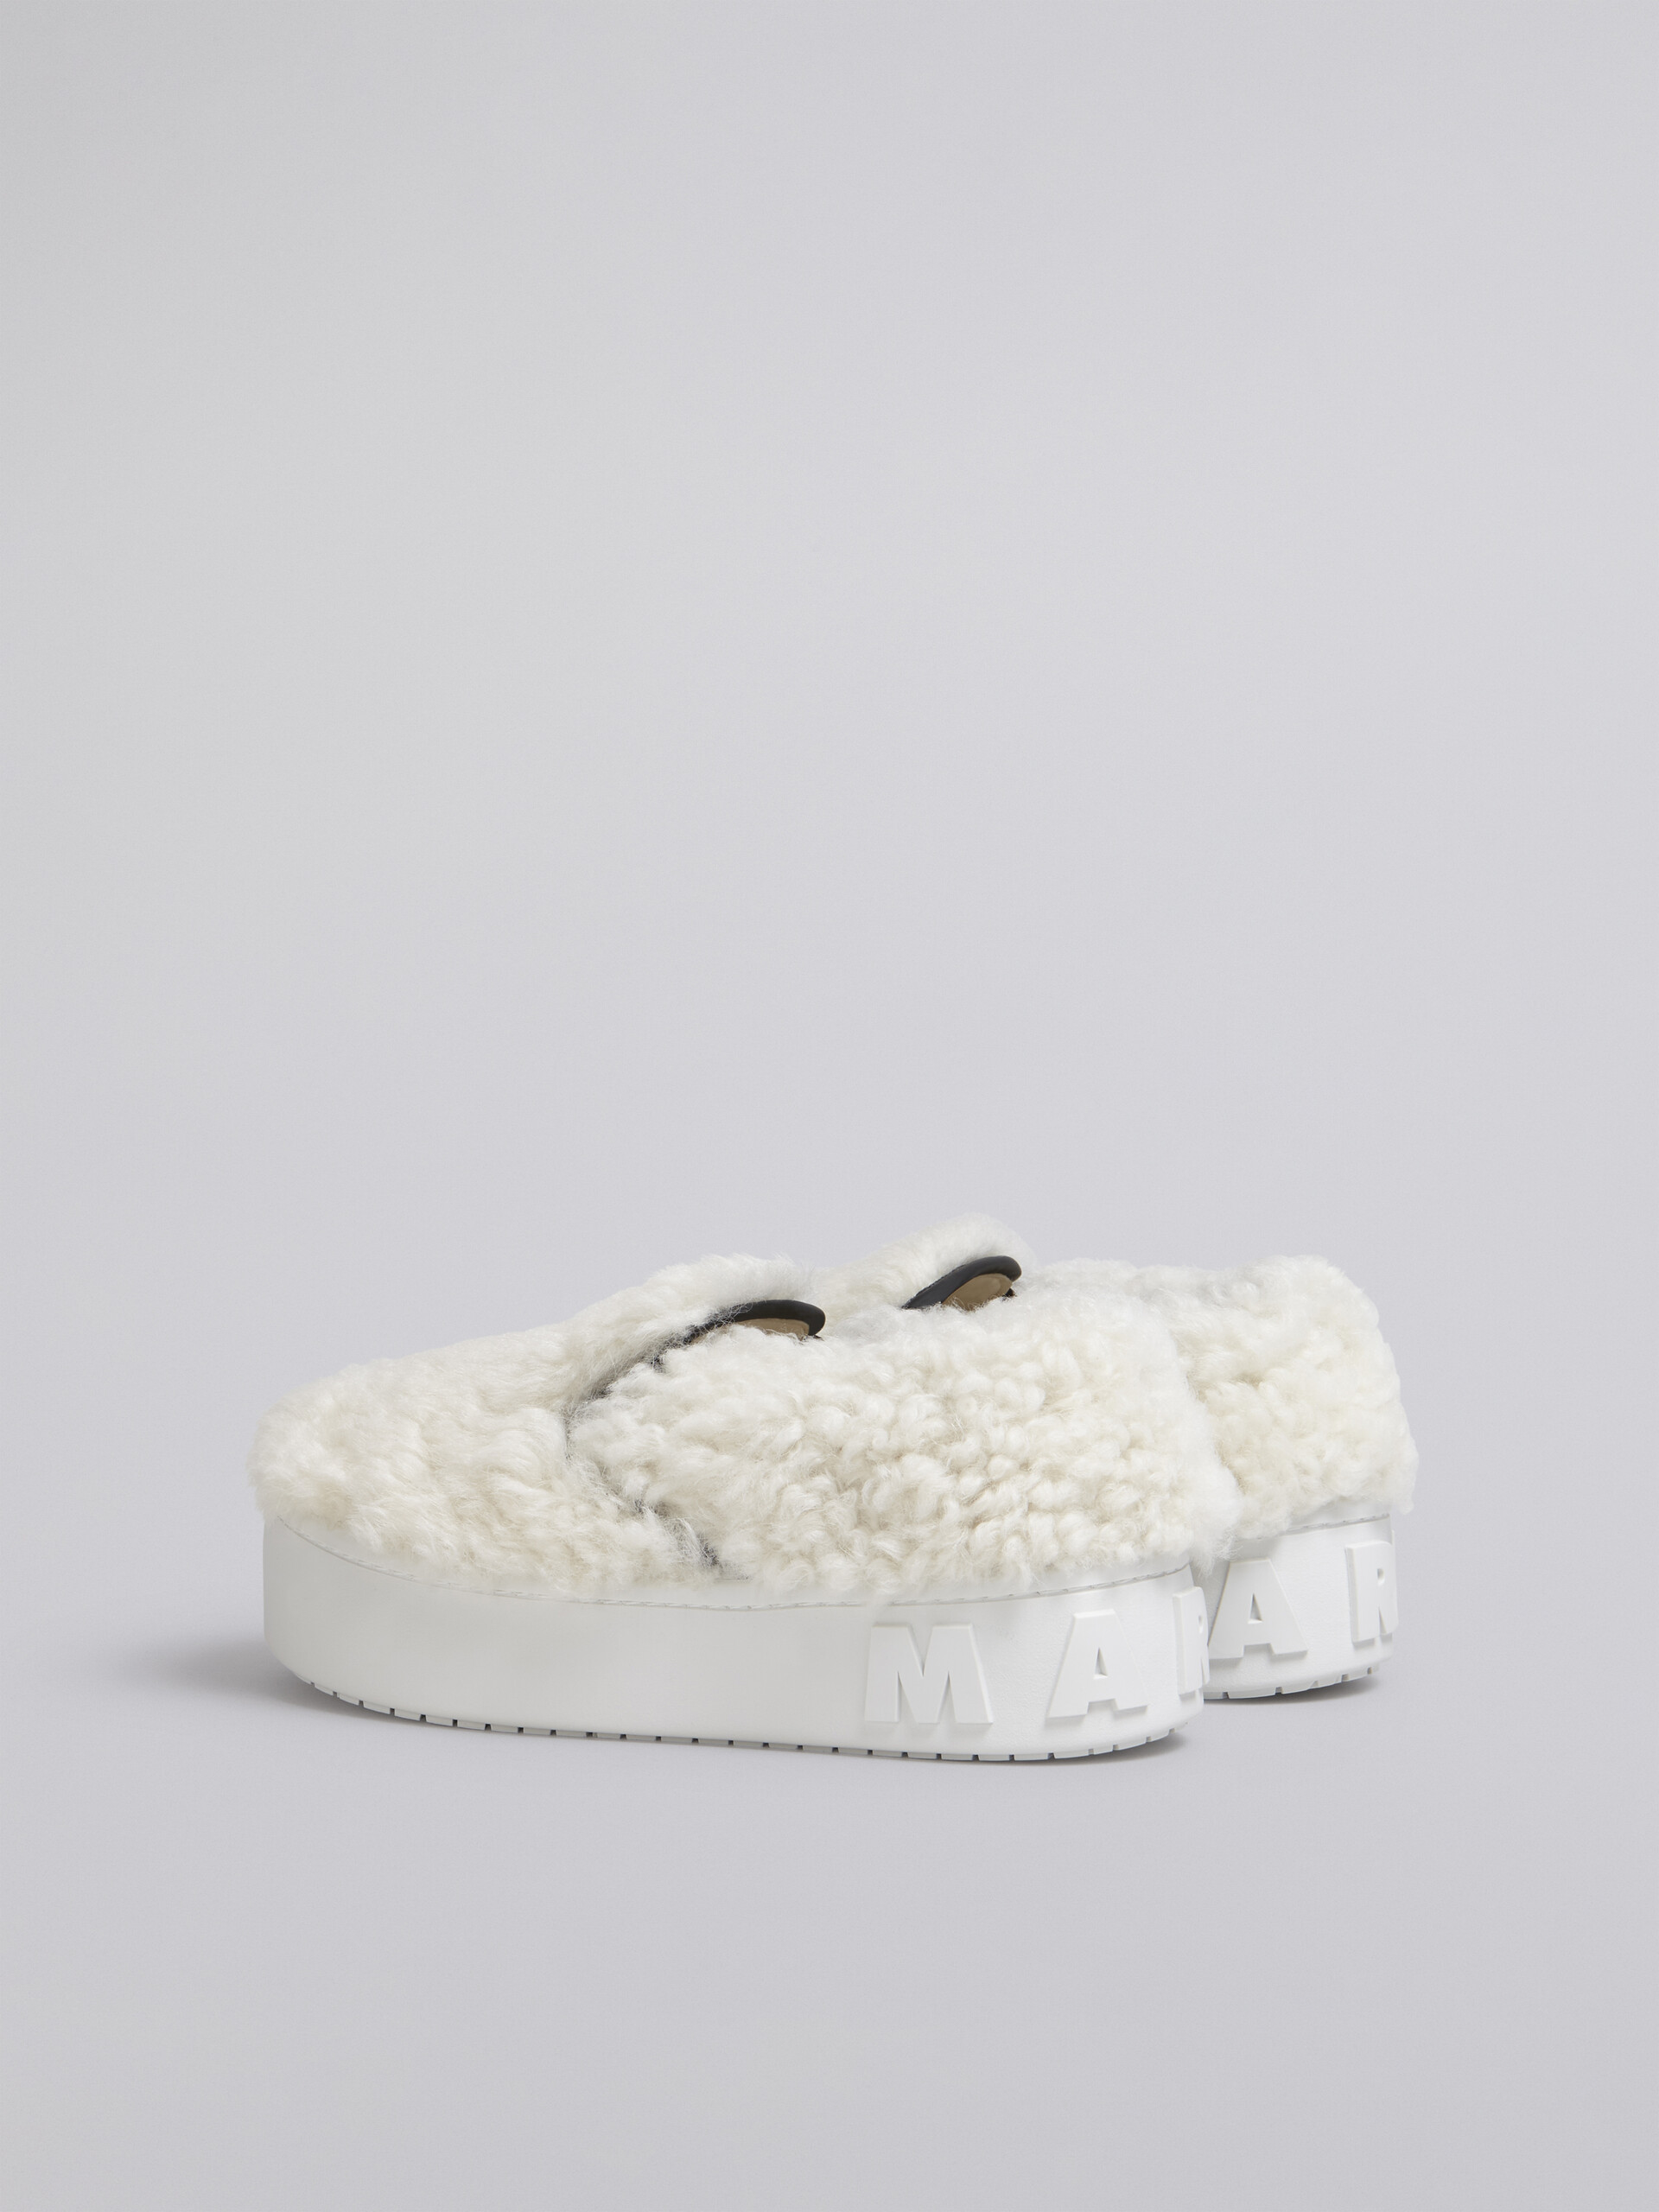 White shearling slip-on sneaker with maxi Marni logo - Sneakers - Image 3